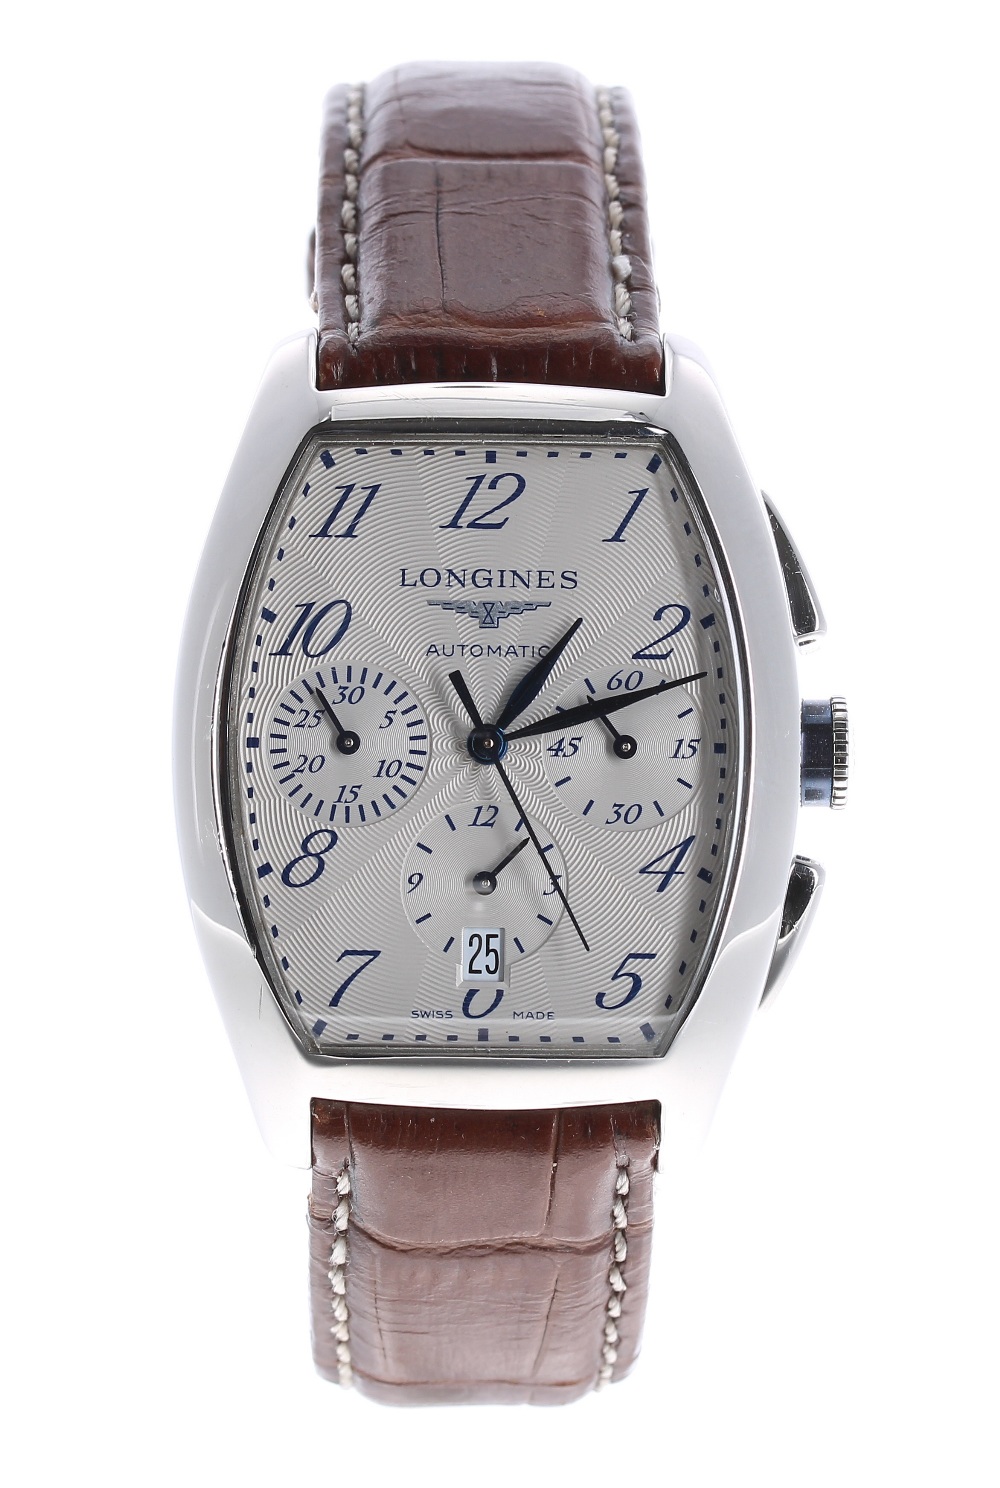 Longines Evidenza chronograph automatic stainless steel gentleman's wristwatch, ref. ref. L2.643 - Image 2 of 3